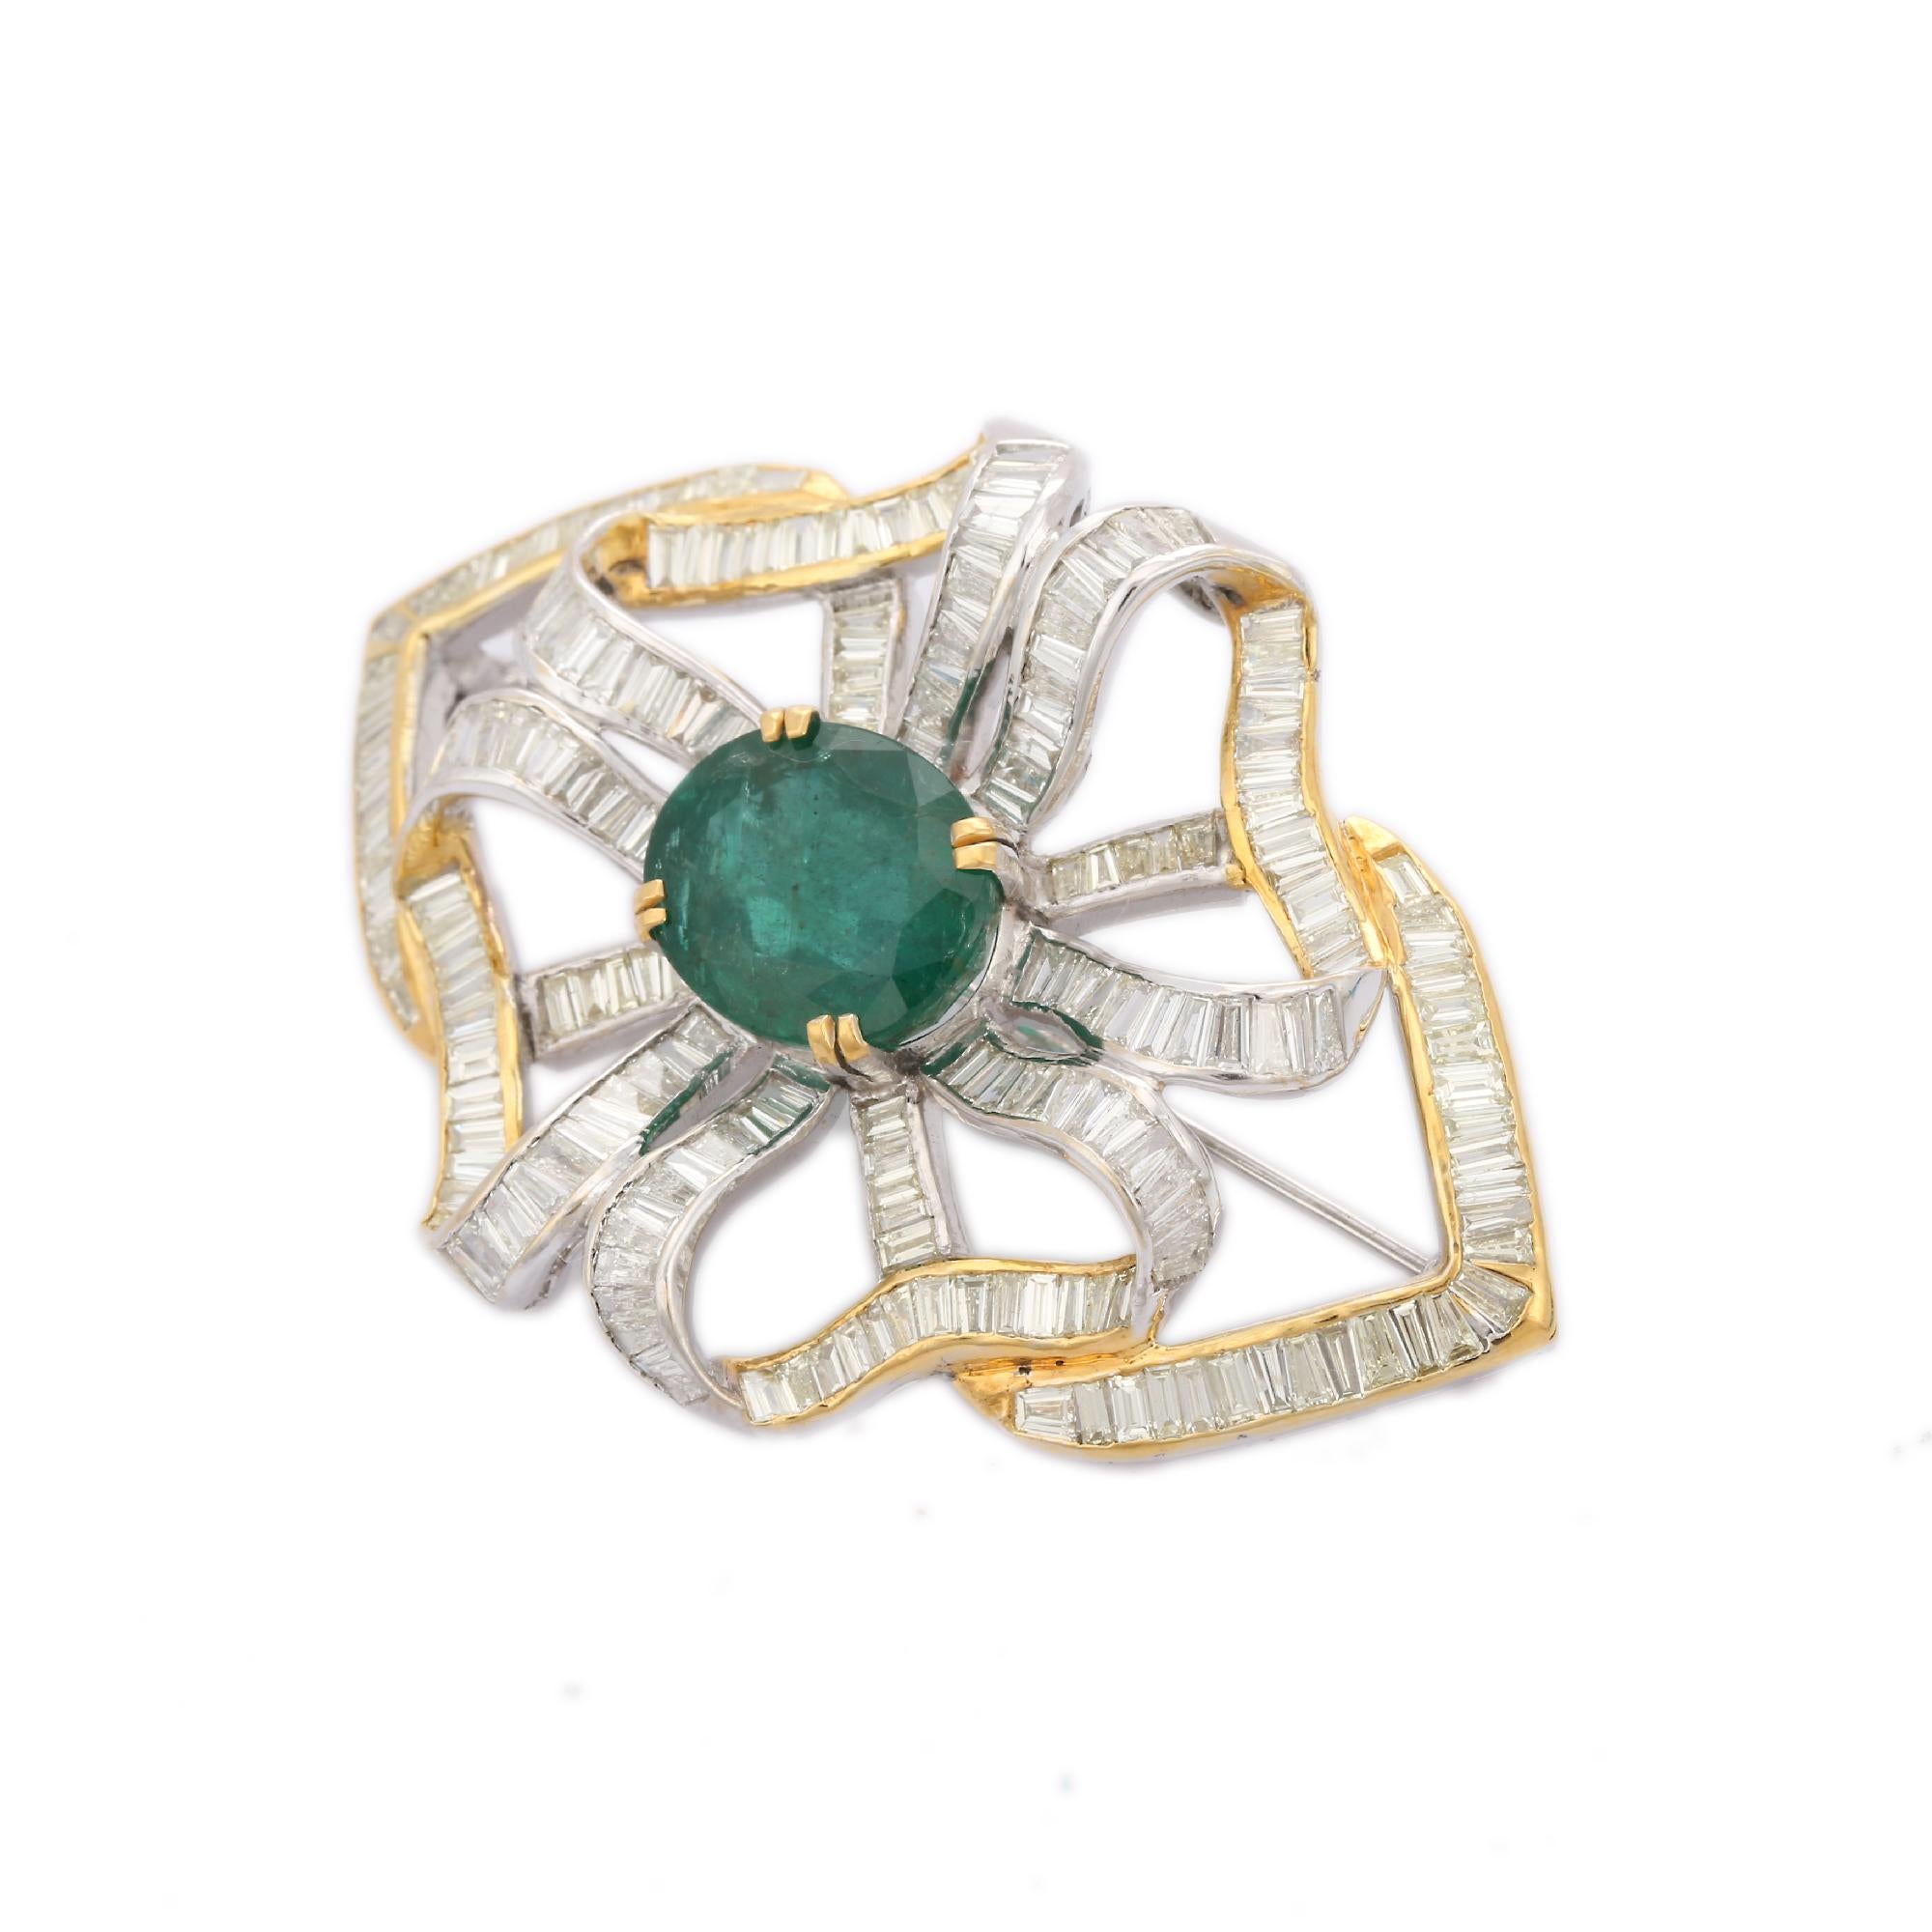 Diamond Emerald Floral Bow Brooch Made in 18K Gold which is a fusion of surrealism and pop-art, designed to make a bold statement. Crafted with love and attention to detail, this features 11.61 carats of emerald which makes you stand out of the